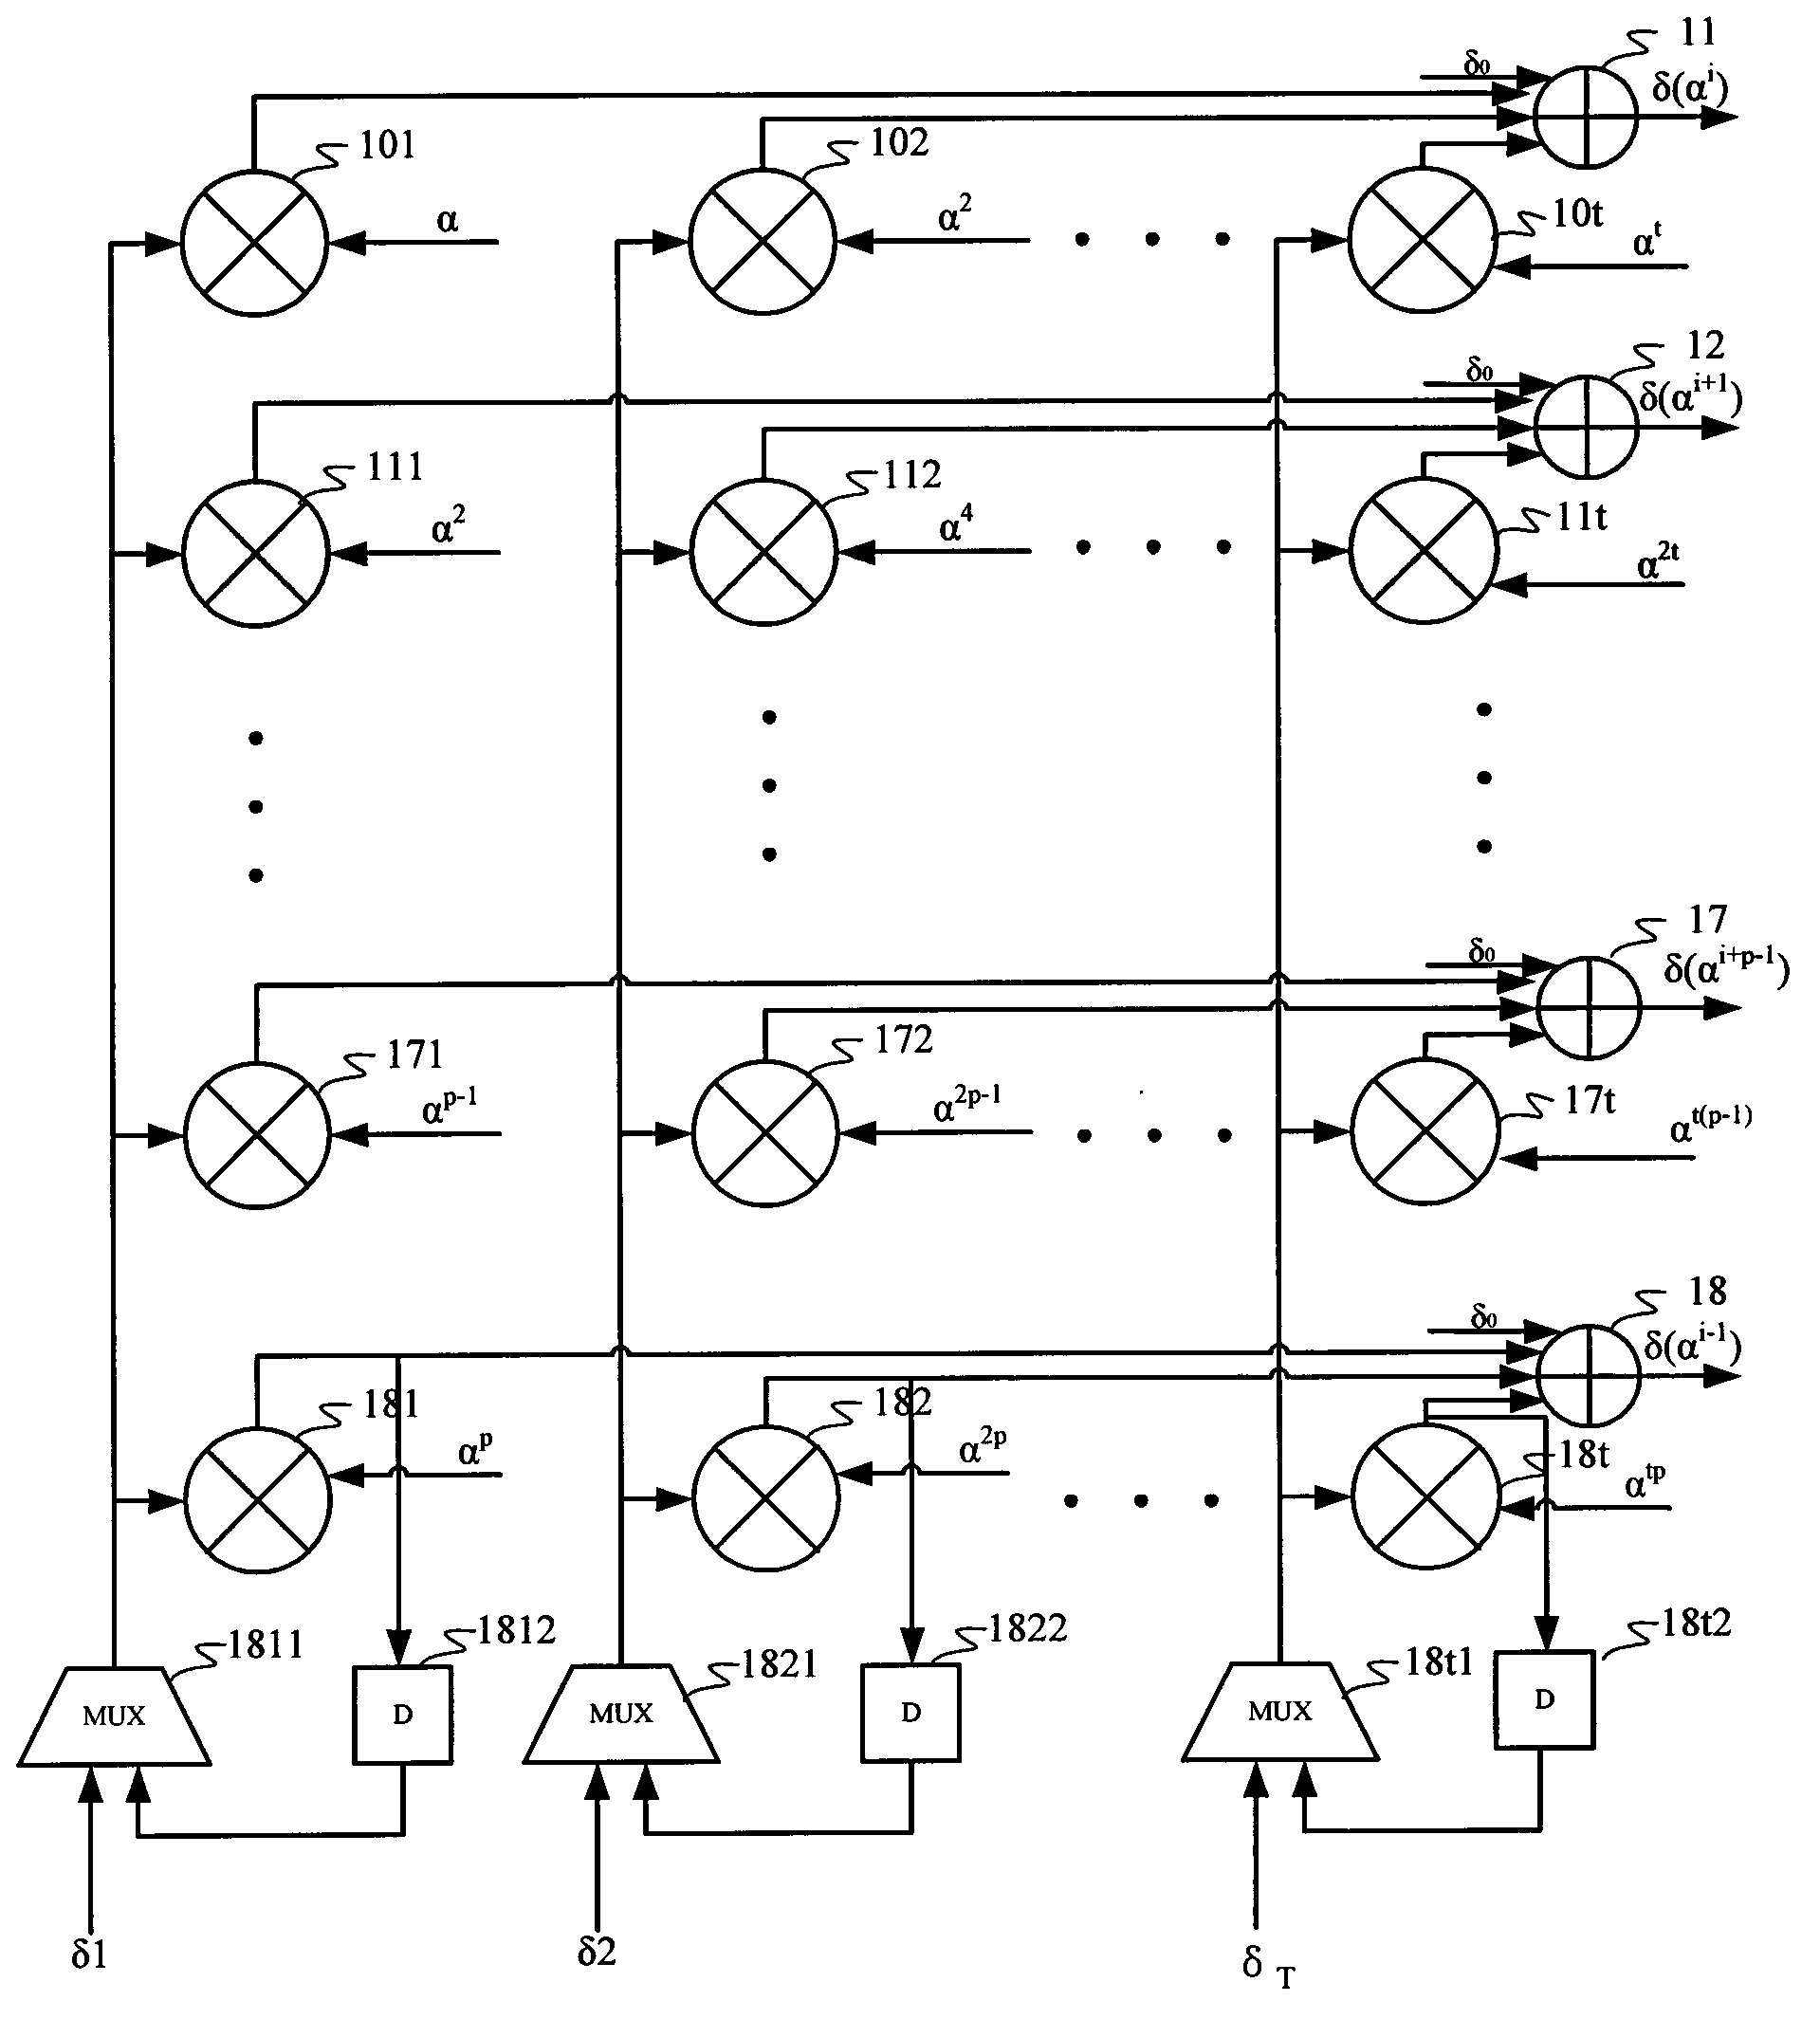 Chien search circuit, and ECC decoding apparatus and method based on the Chien search circuit